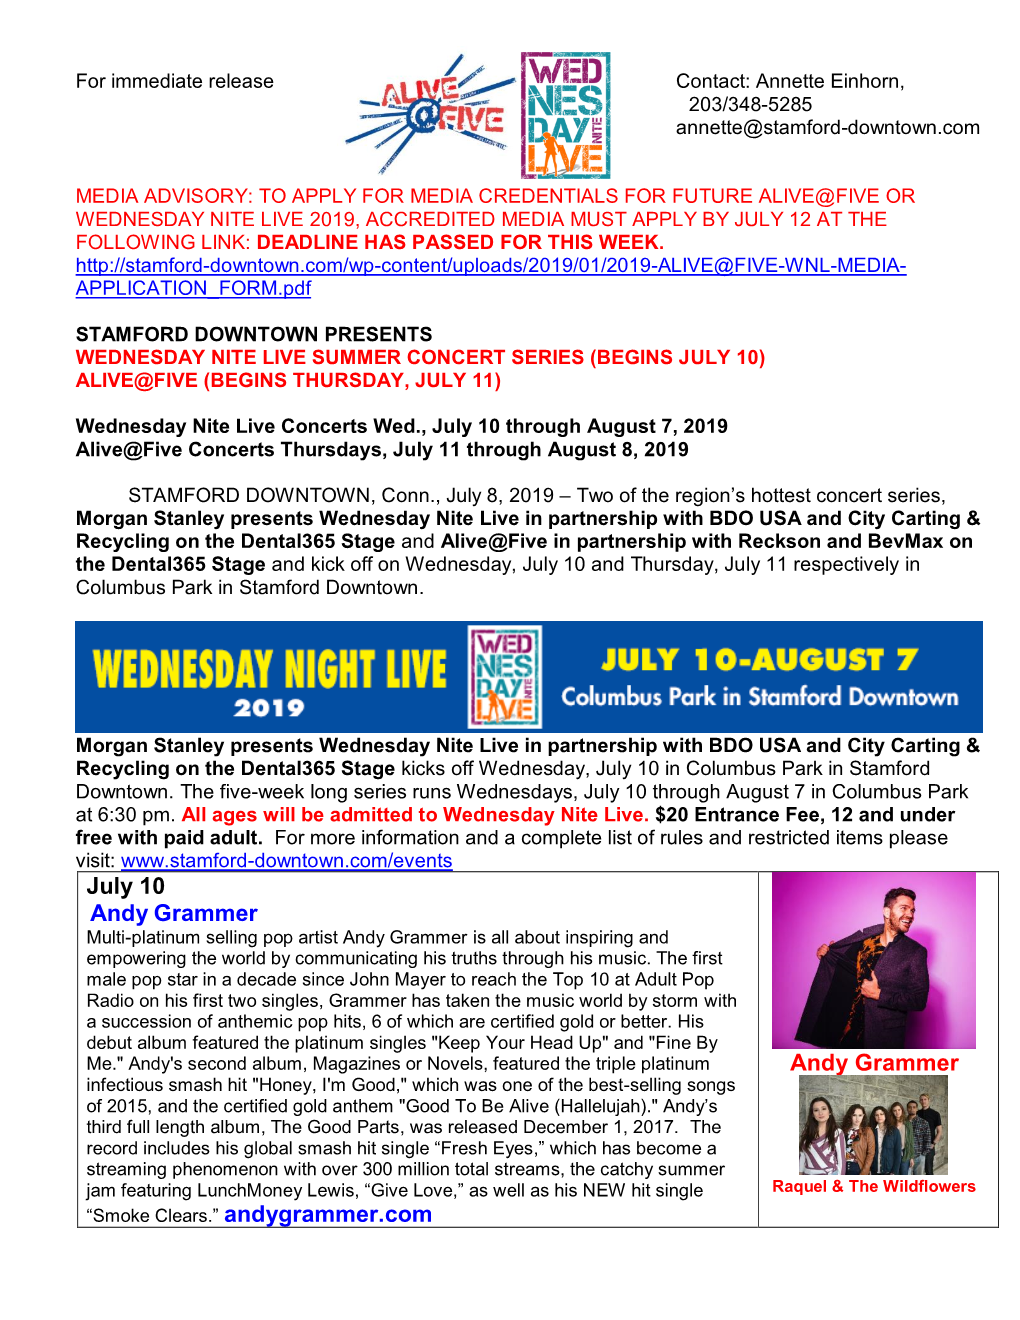 Alive@Five and Wednesday Nite Live Begins This Week